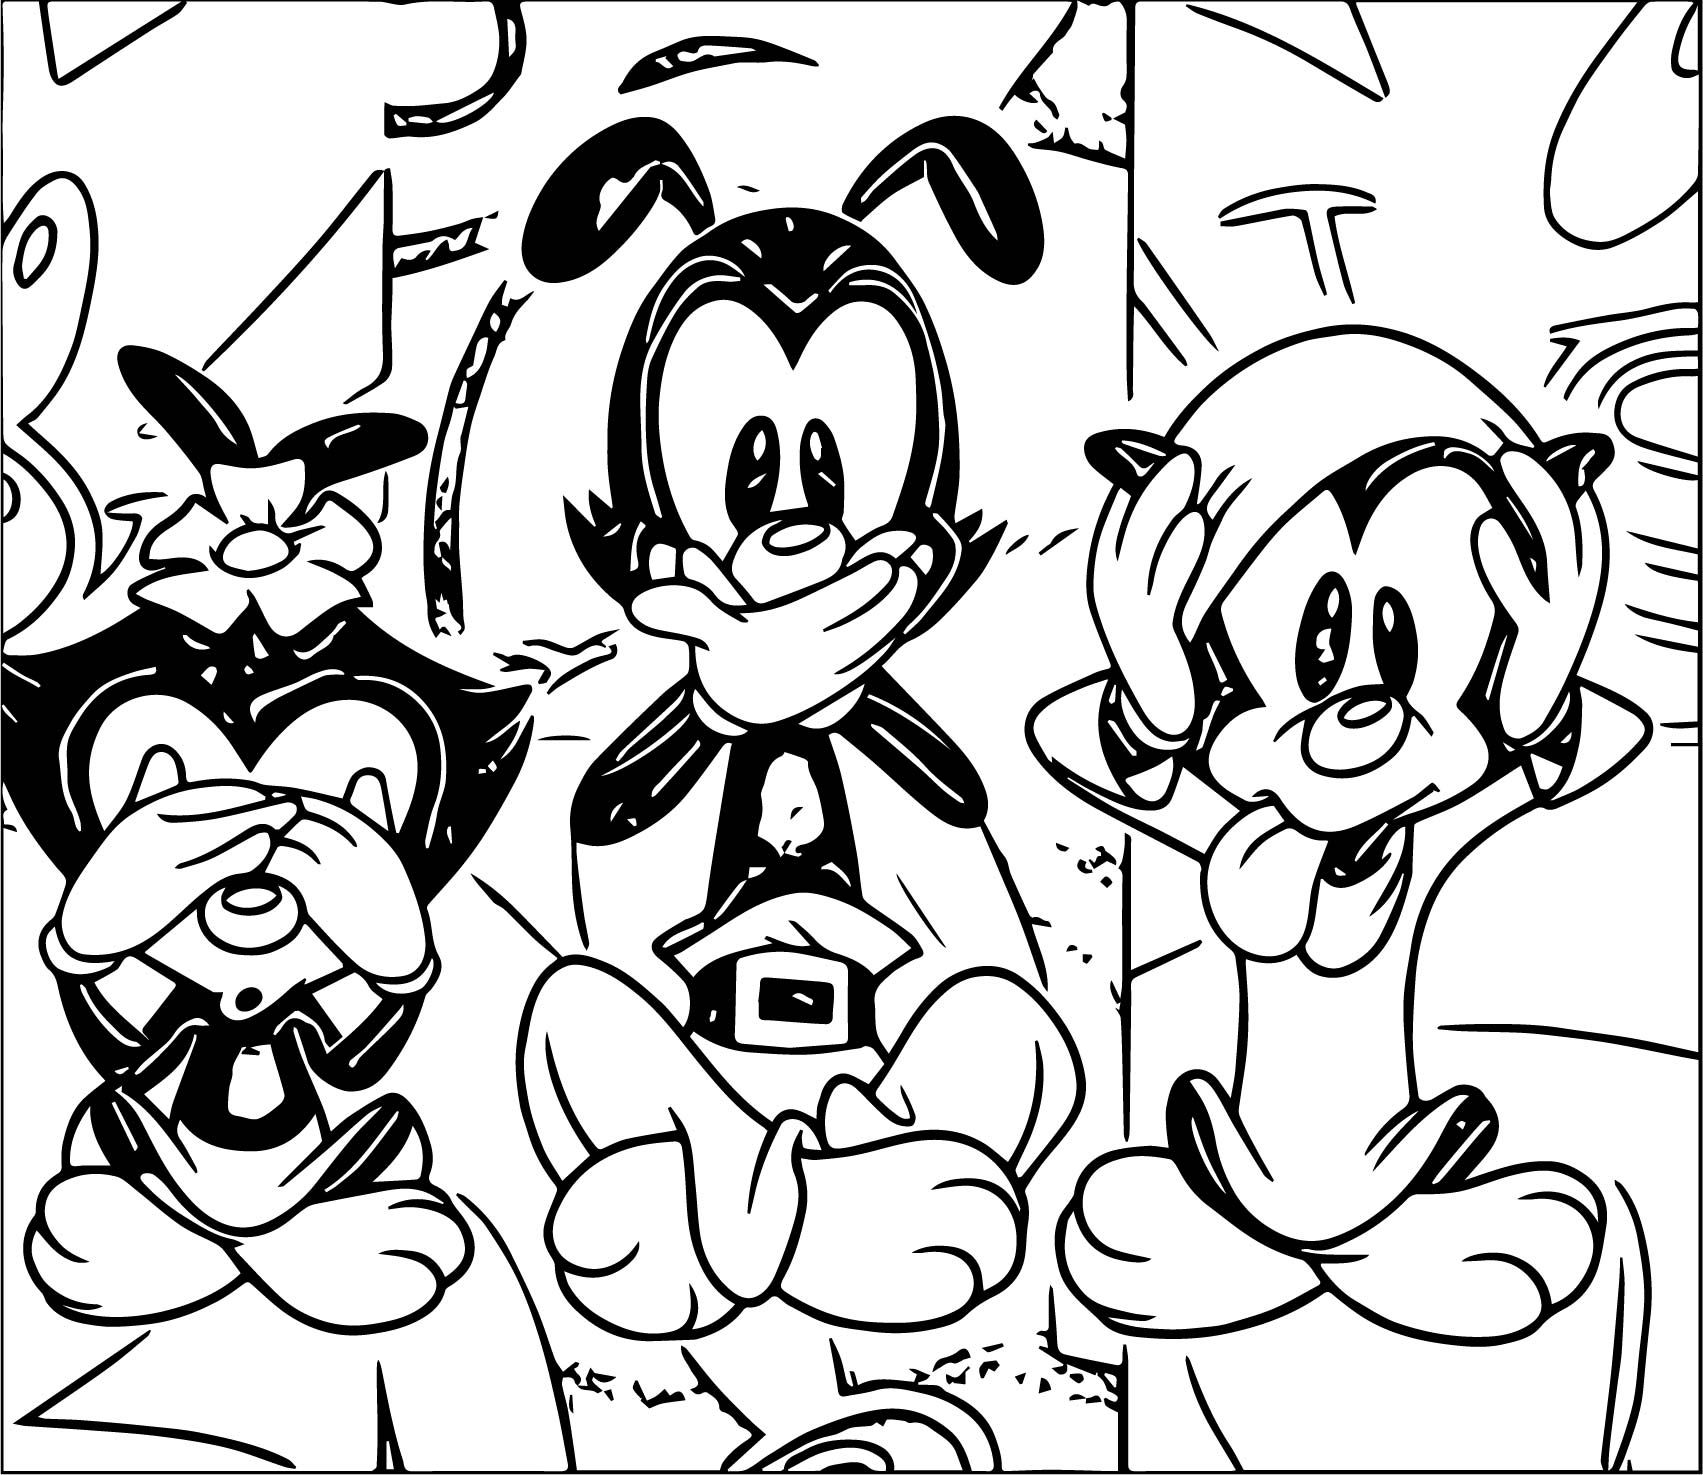 See Speak Hear No Animaniacs Coloring Page